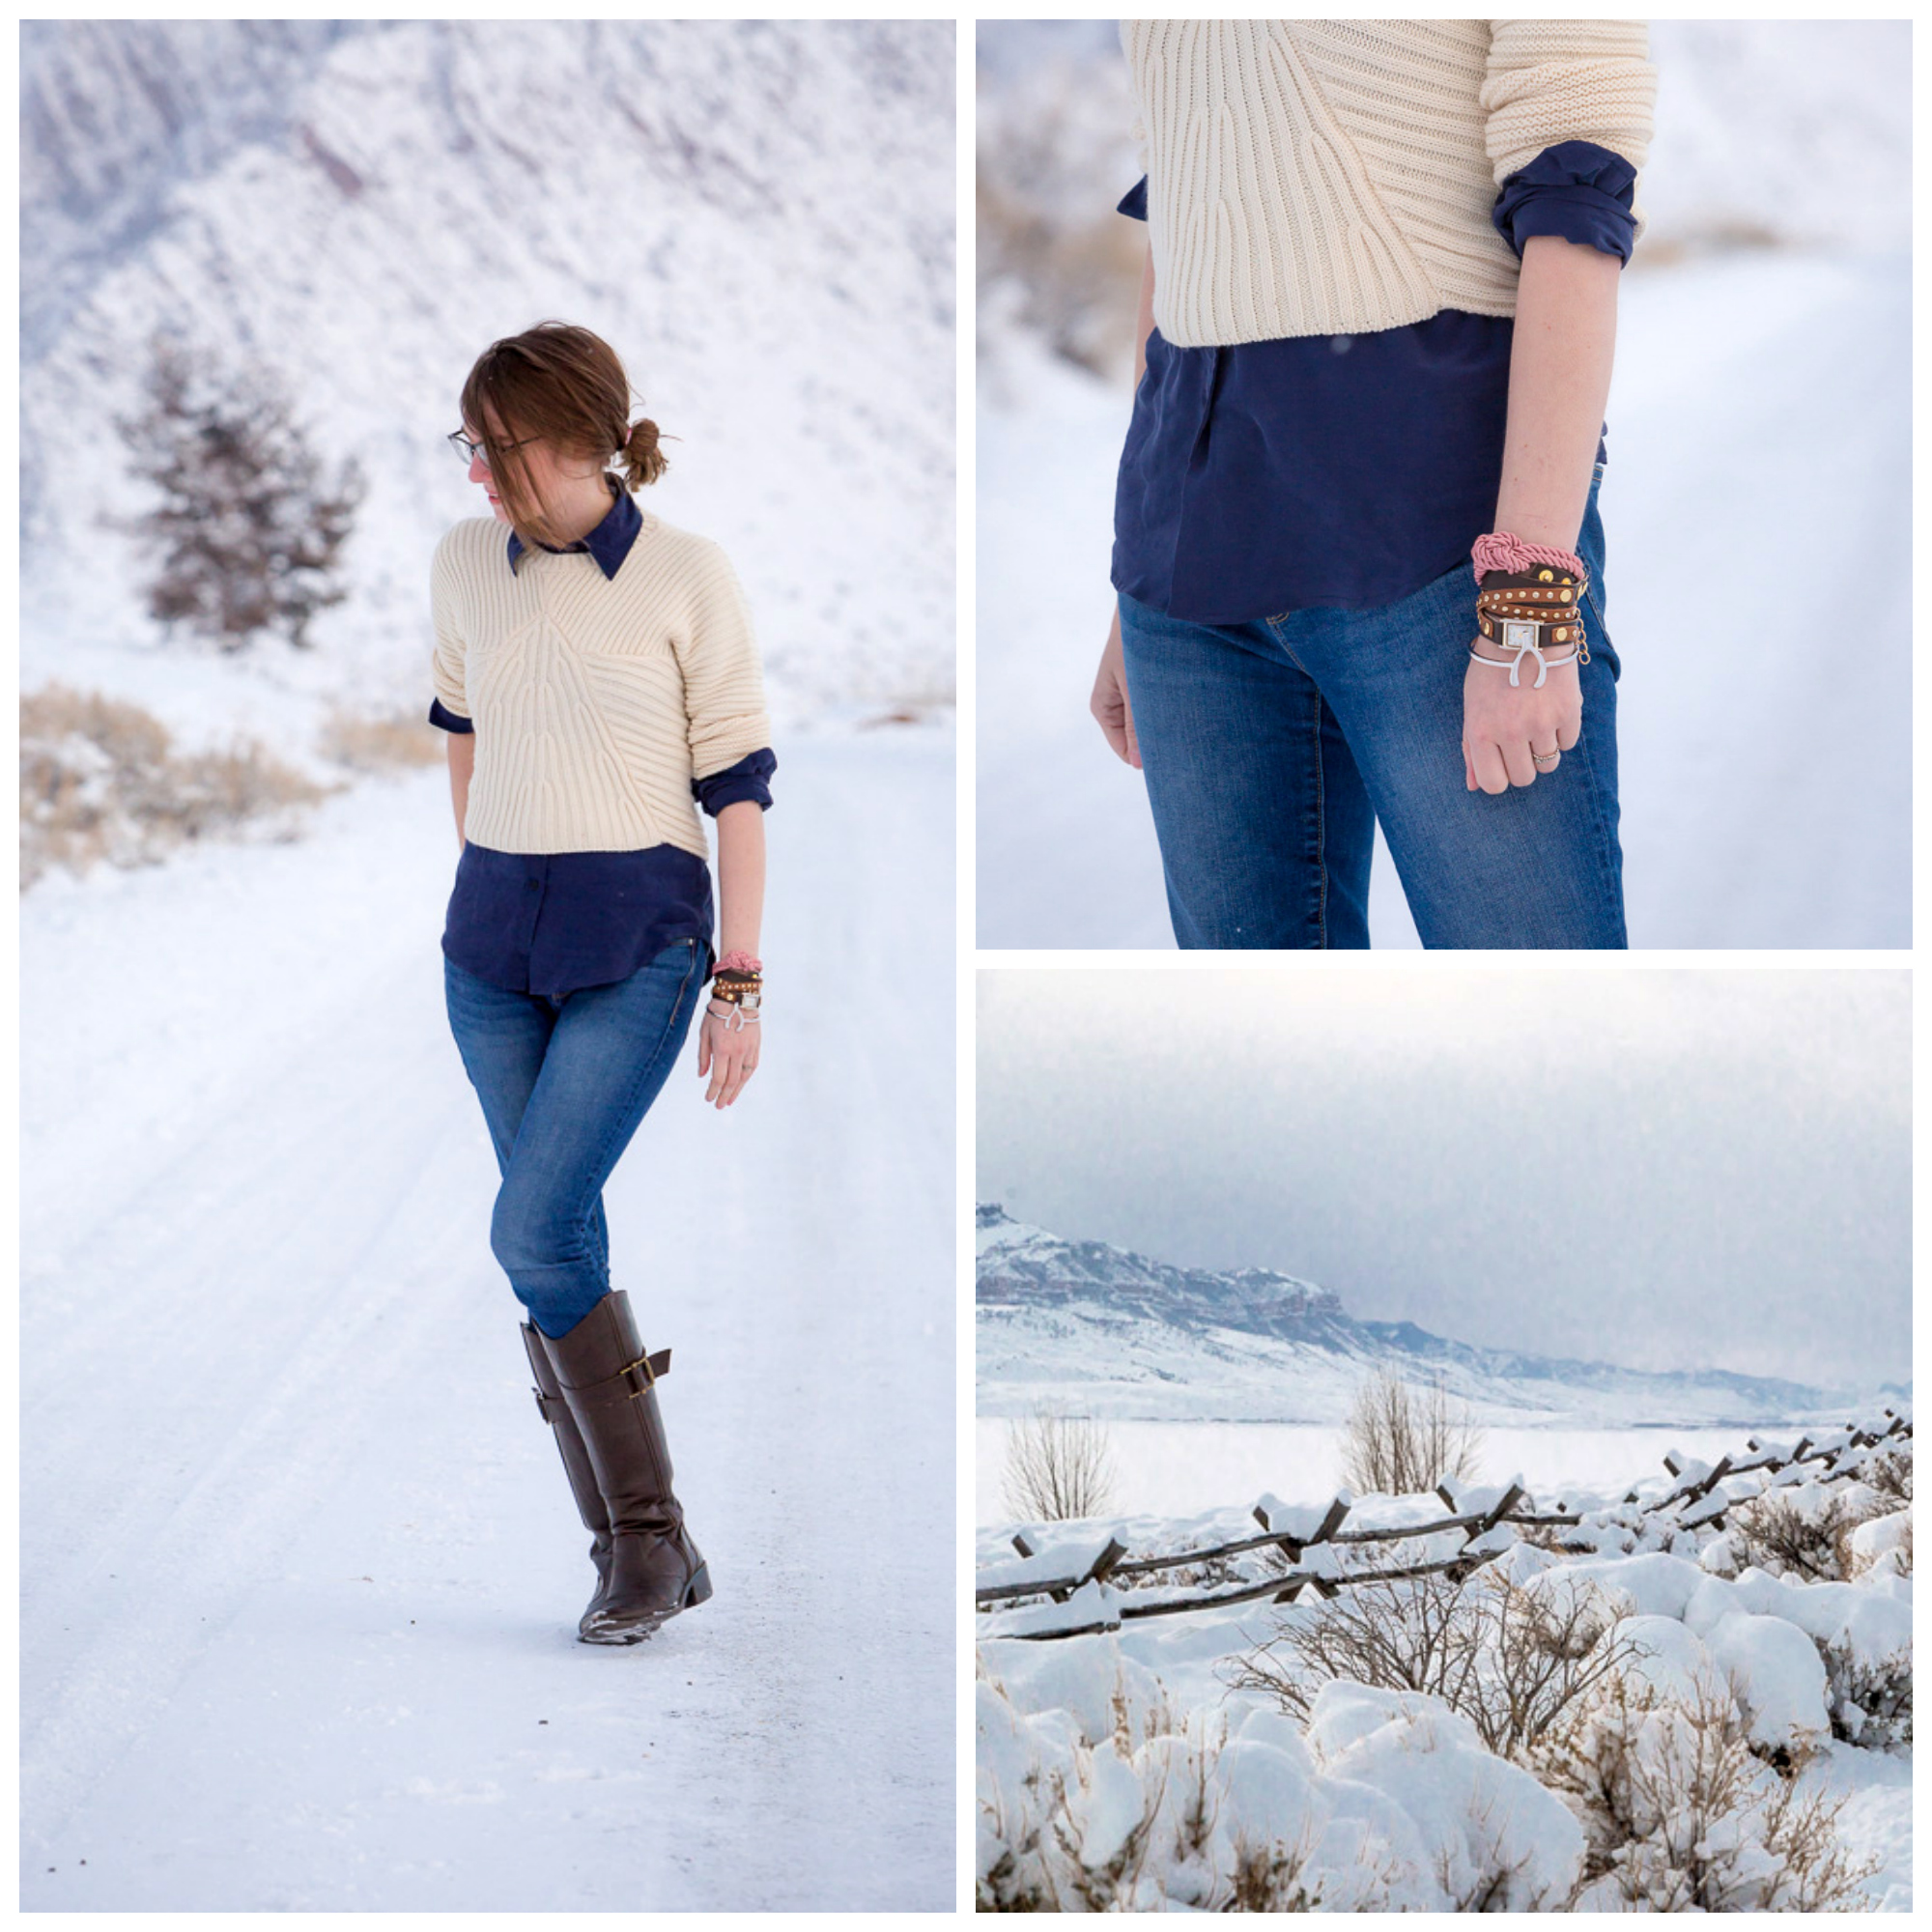 winter outfit, wyoming, Tomboy, snow, never fully dressed, withoutastyle, sweater, layers, popbasic shirt, 